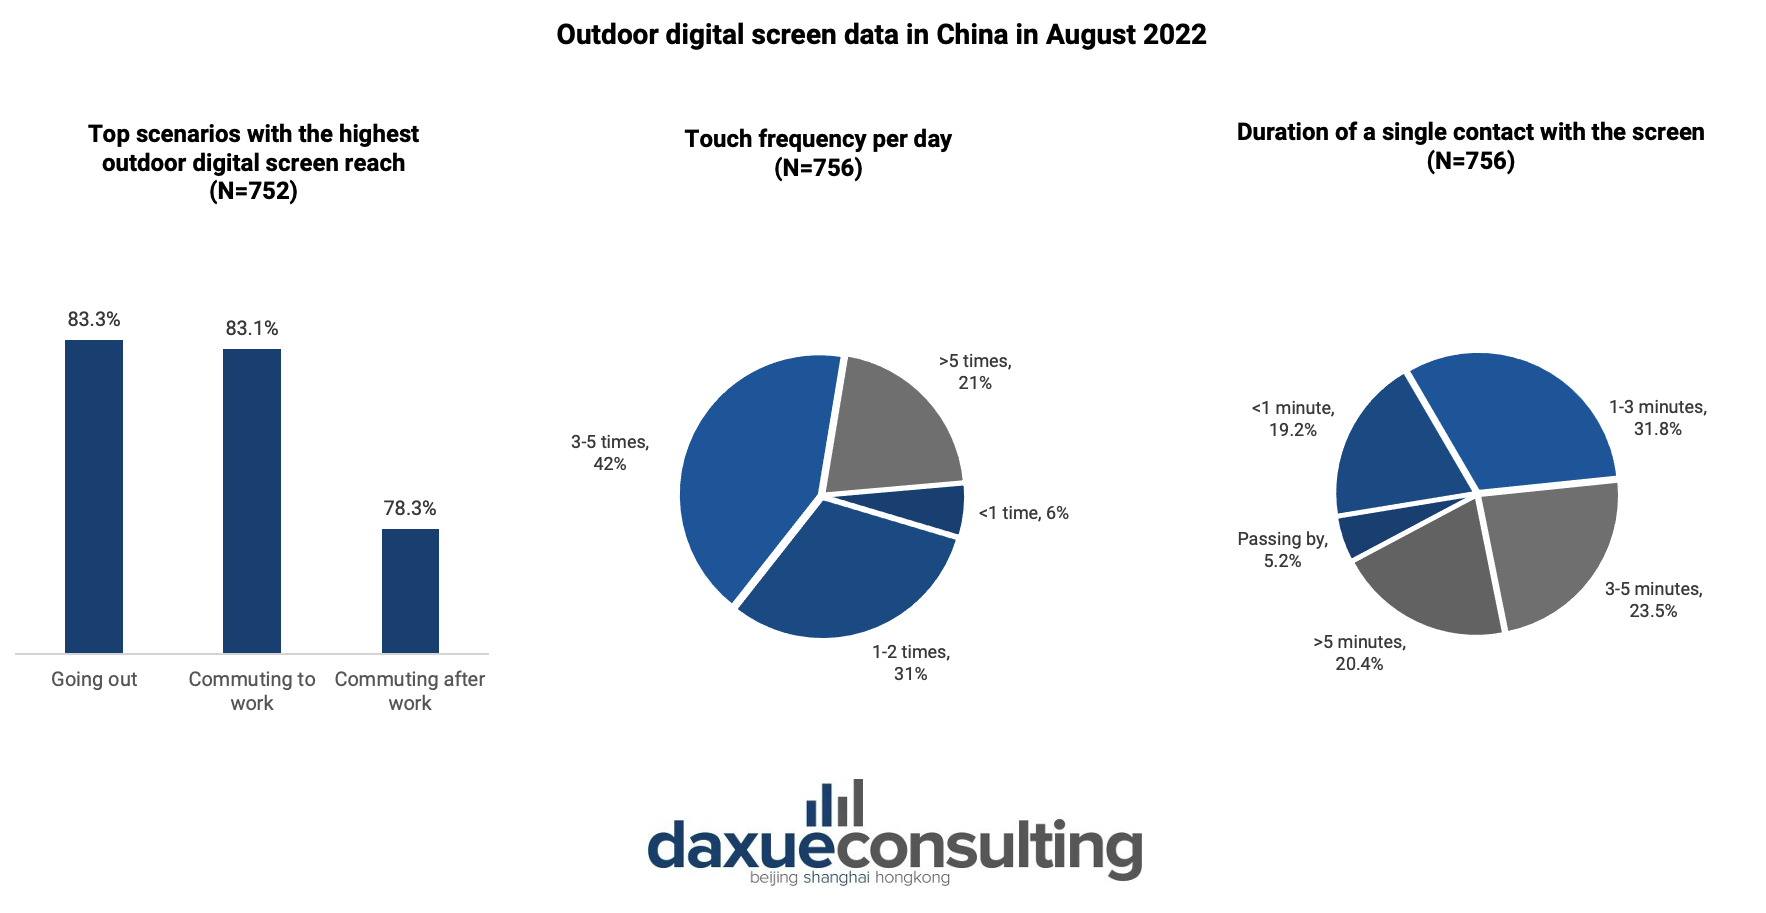 Outdoor digital screen data in China in August 2022